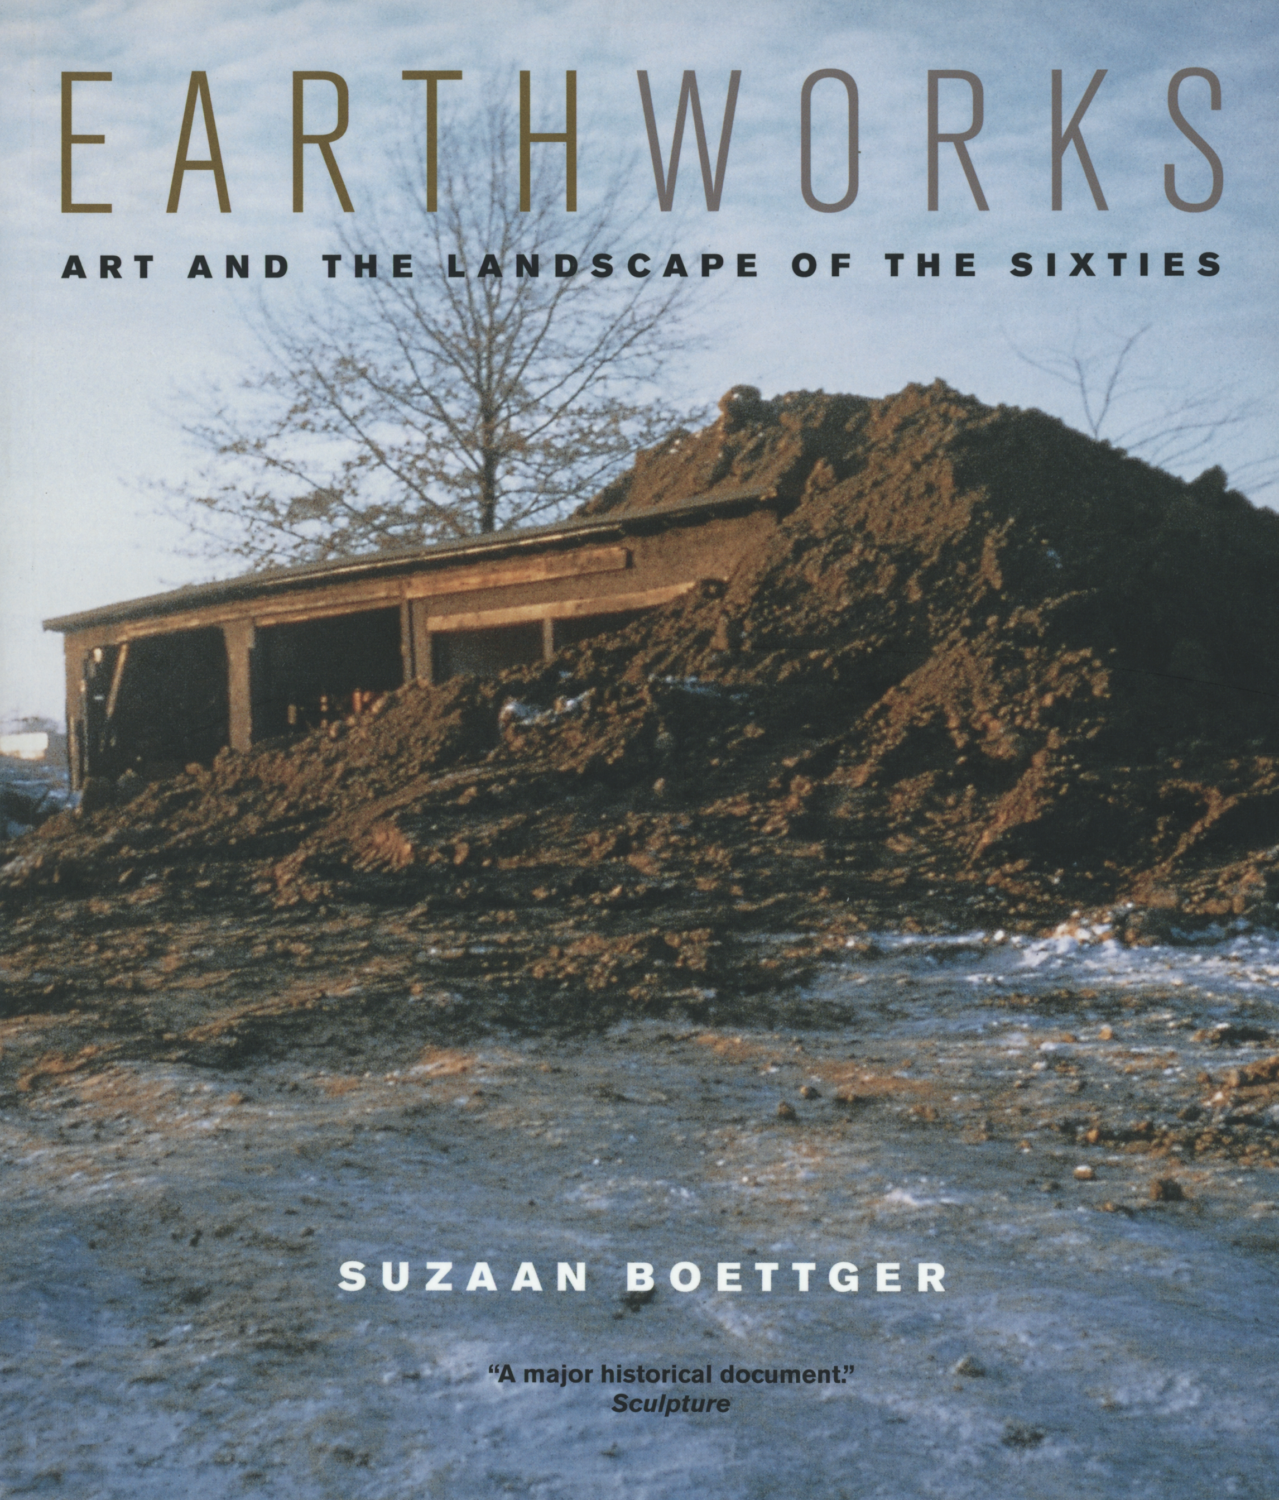 Earthworks. Art and the Landscape of the Sixties